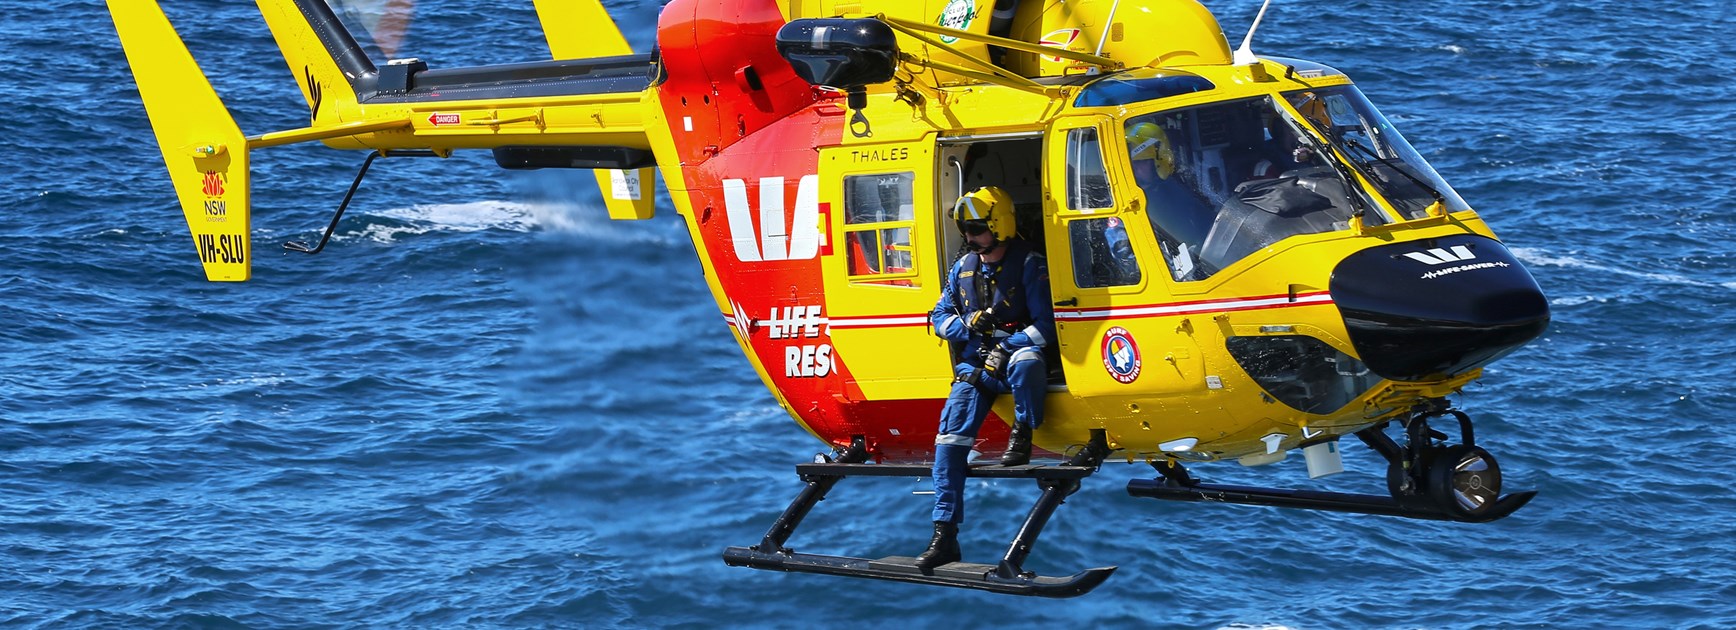 Westpac helicopter headlines Emergency Services Cup